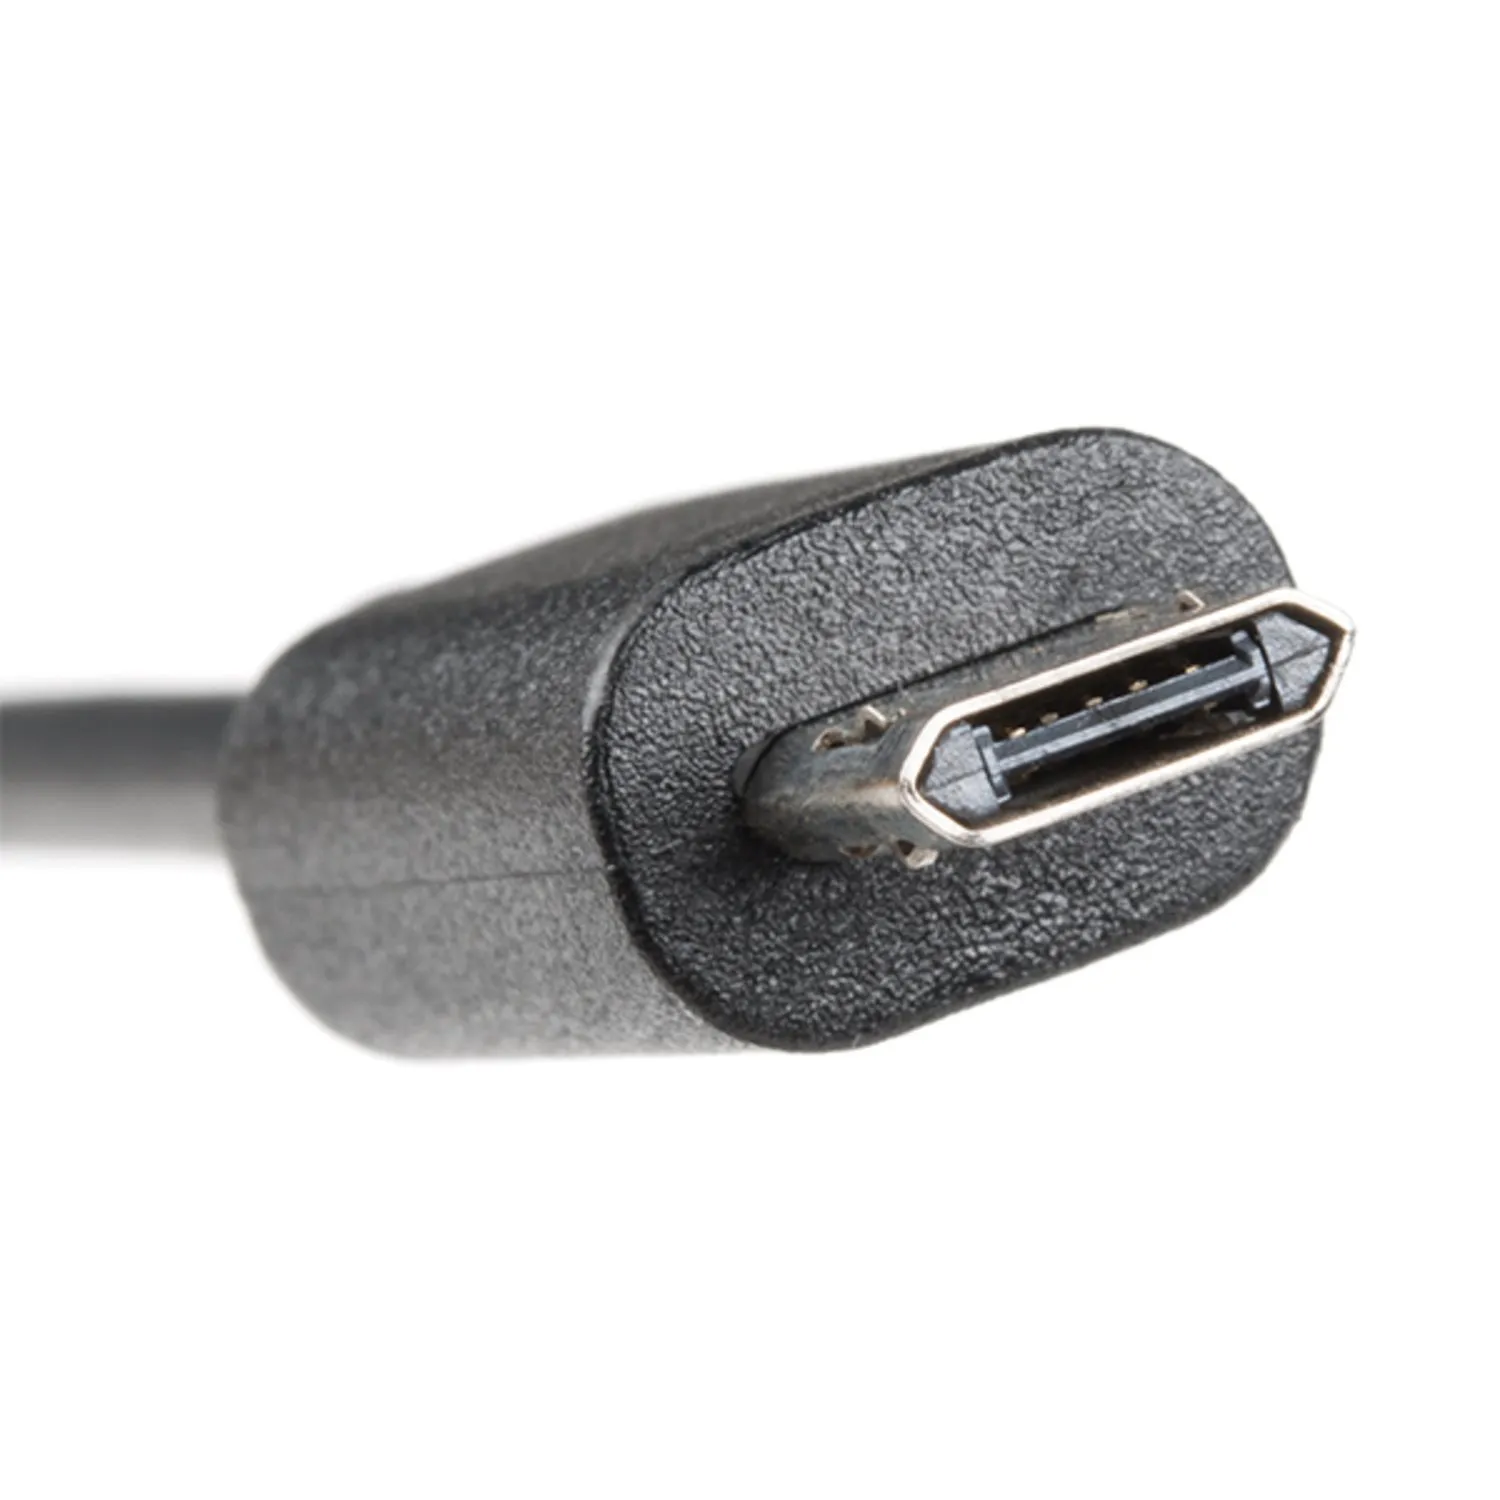 Photo of Reversible USB A to Reversible Micro-B Cable - 0.8m